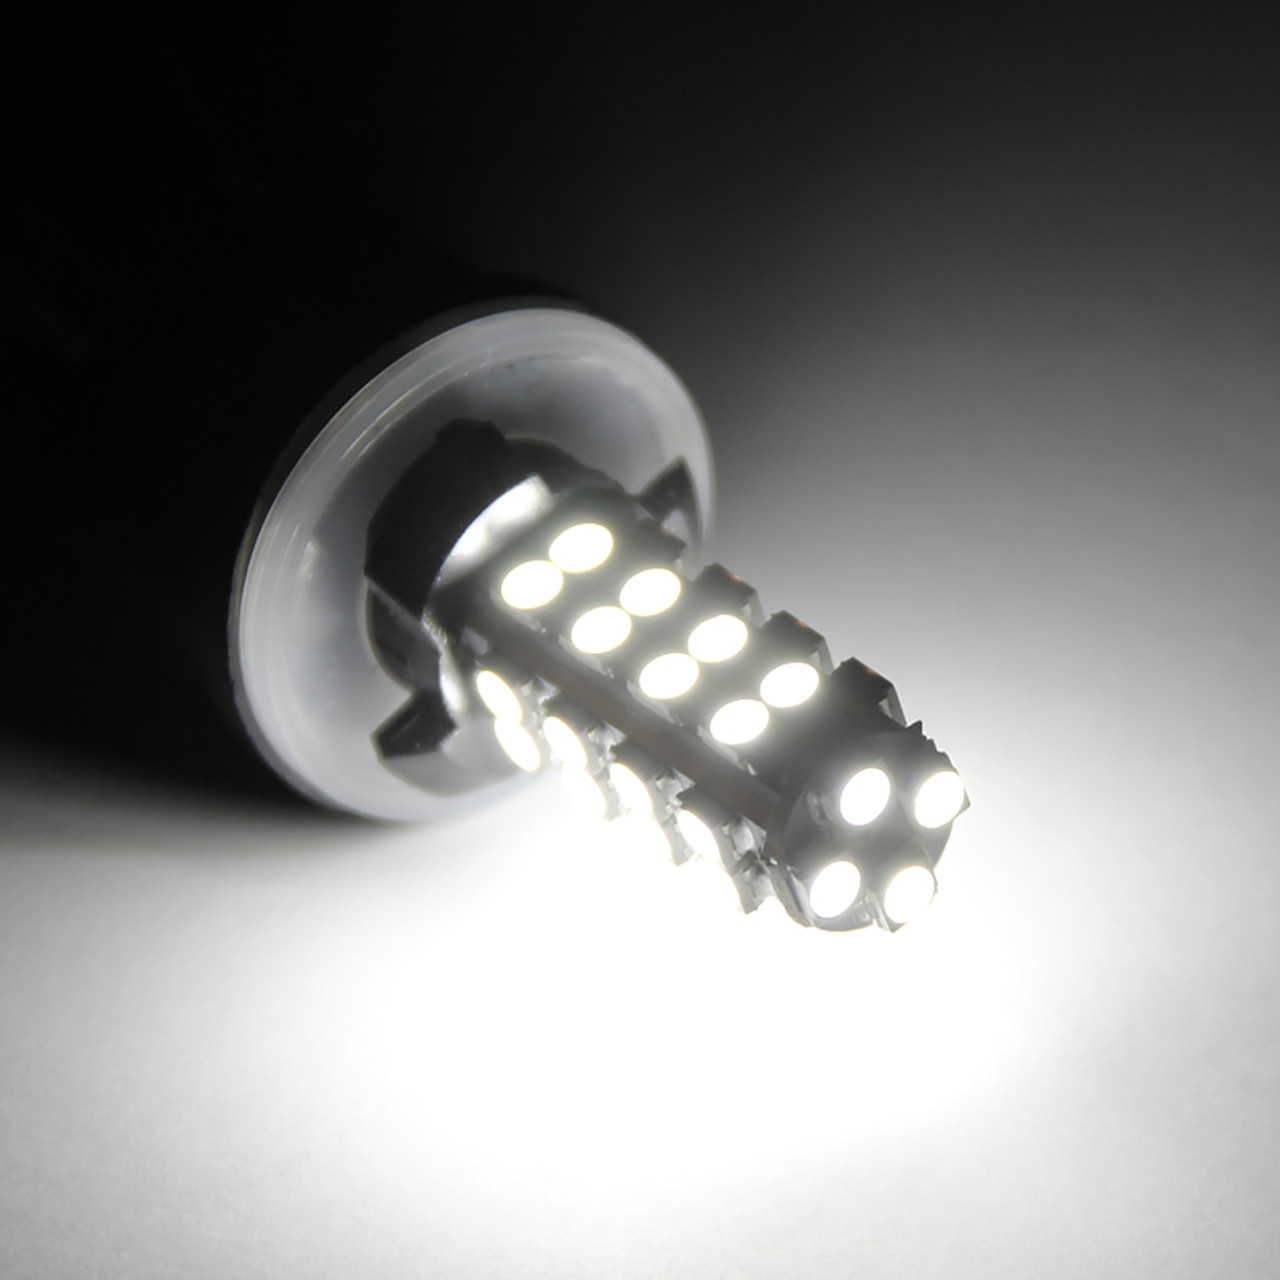 T10 5 SMD LED Bulb w/ Integrated Canbus - 2PC (White) - Spec-D Tuning